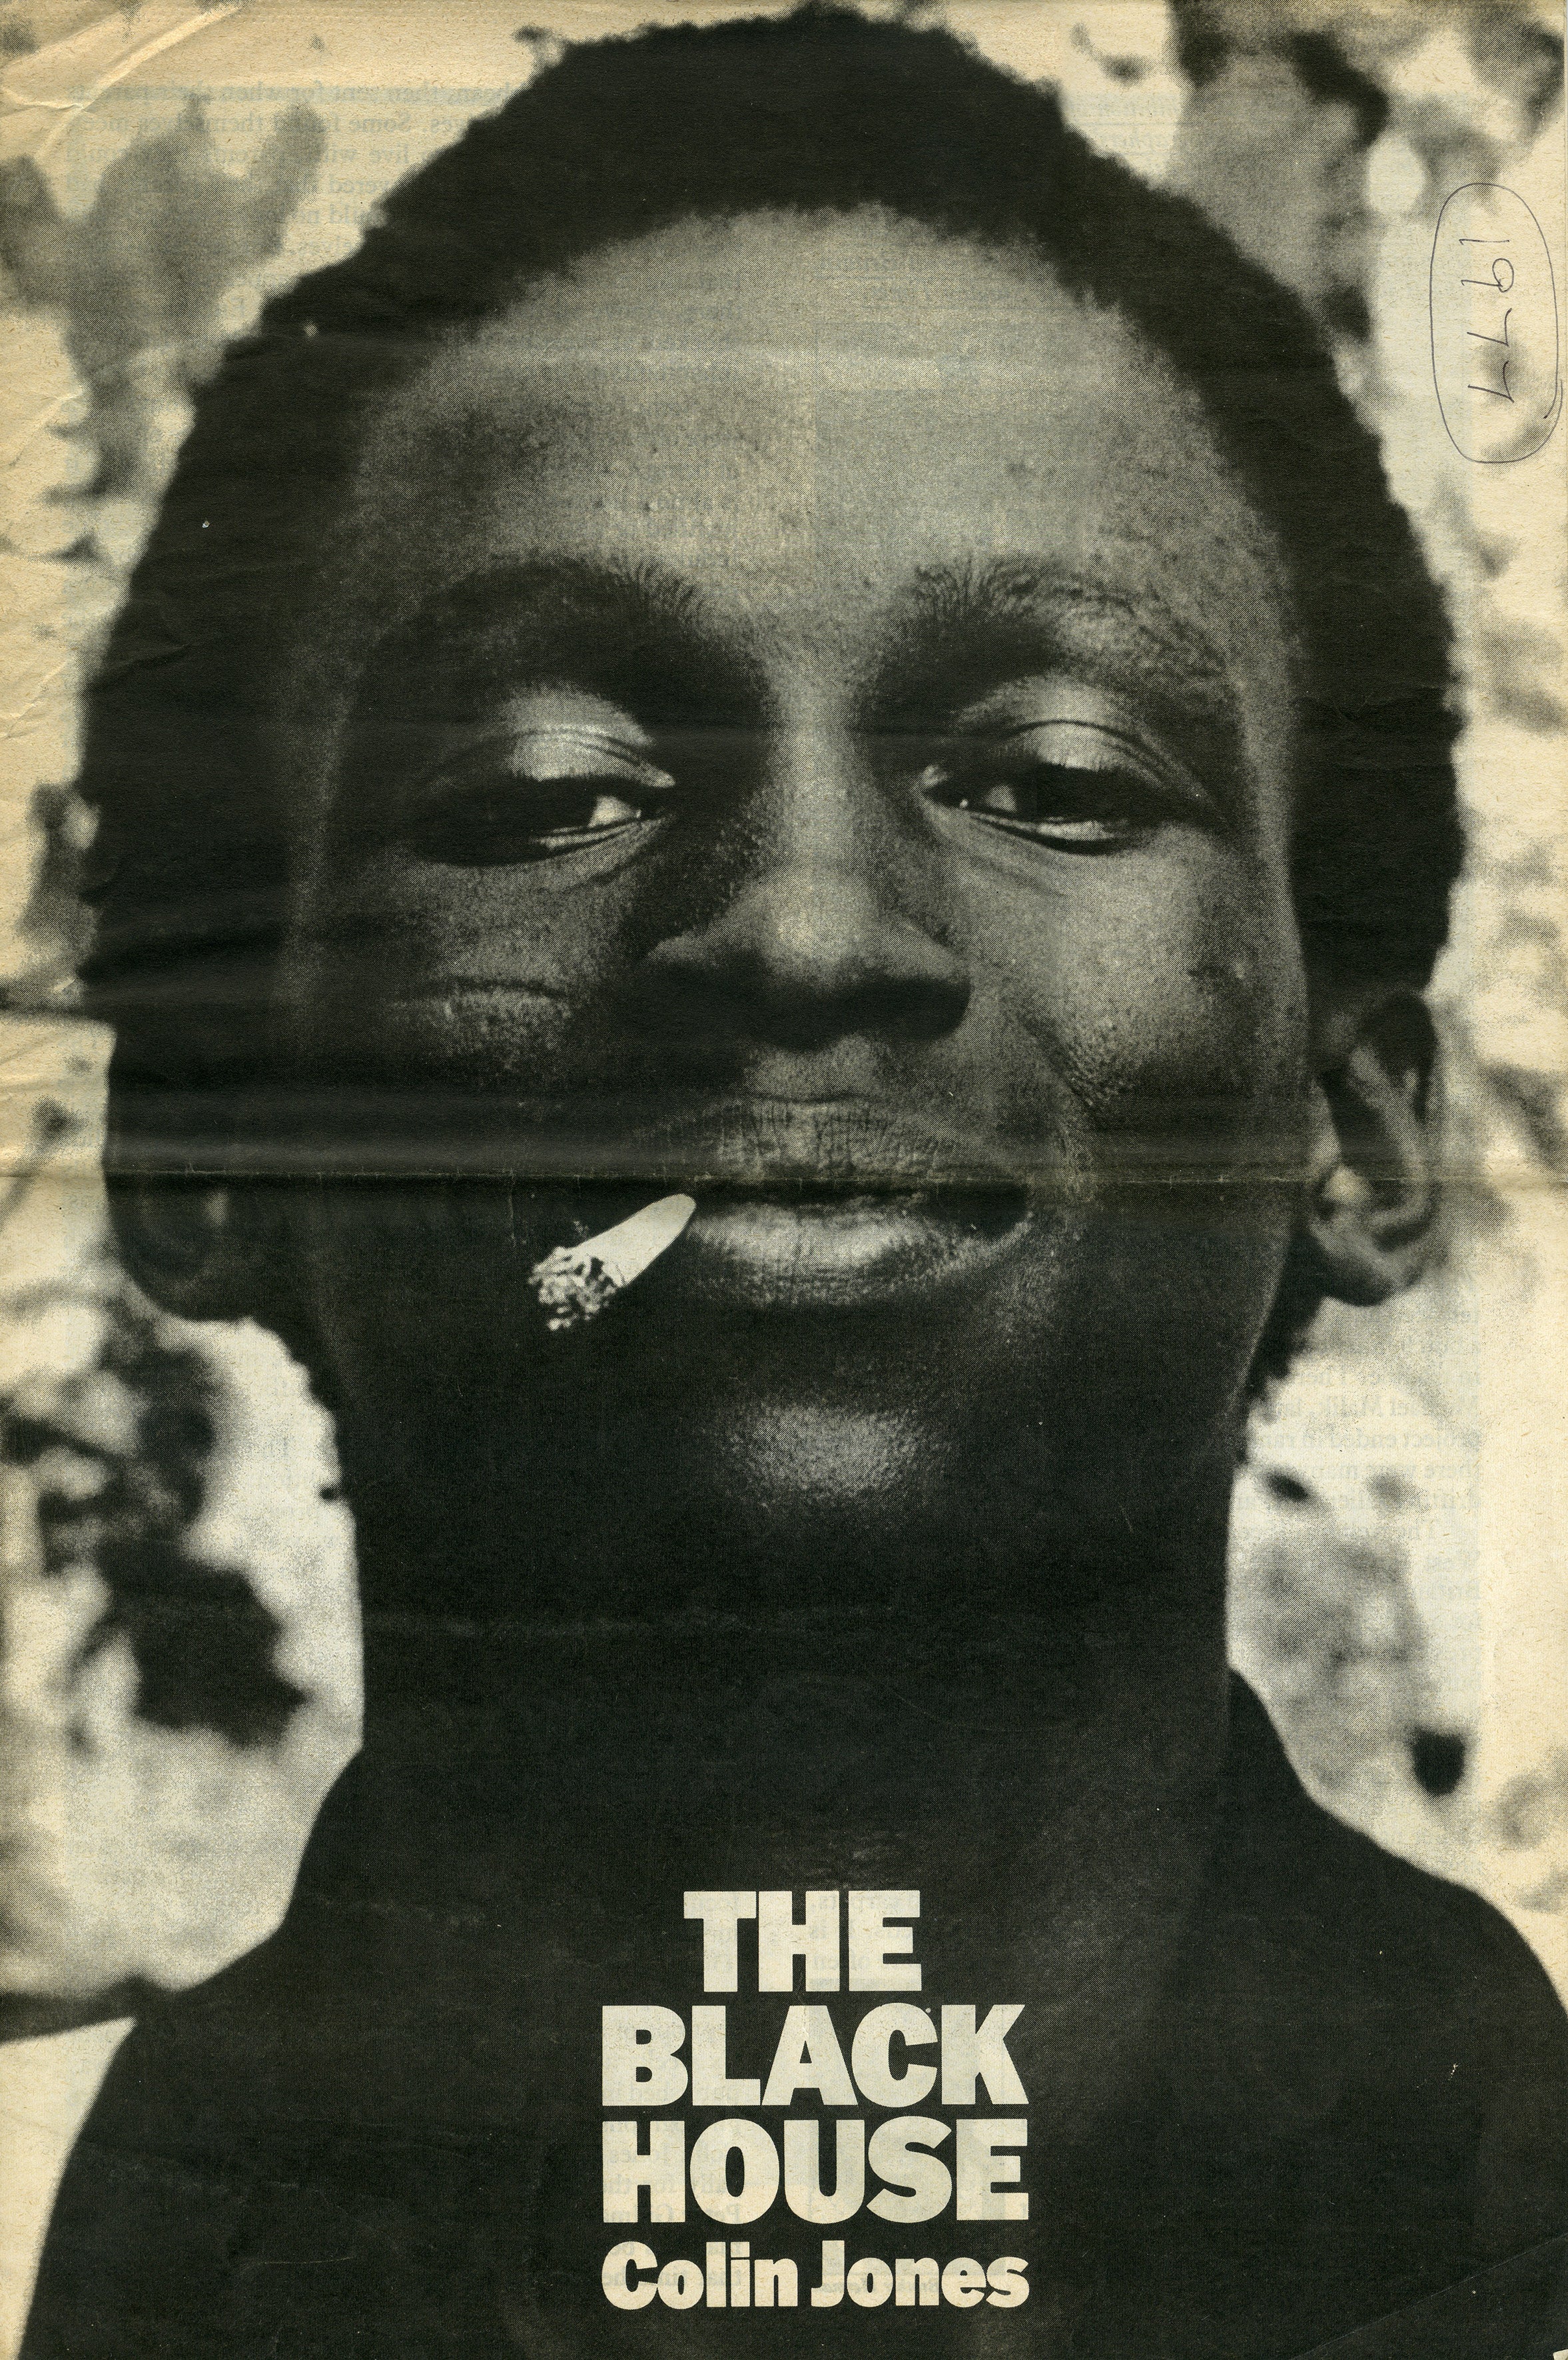 The Black House, held at The Photographers’ Gallery, 04 May – 04 June 1977